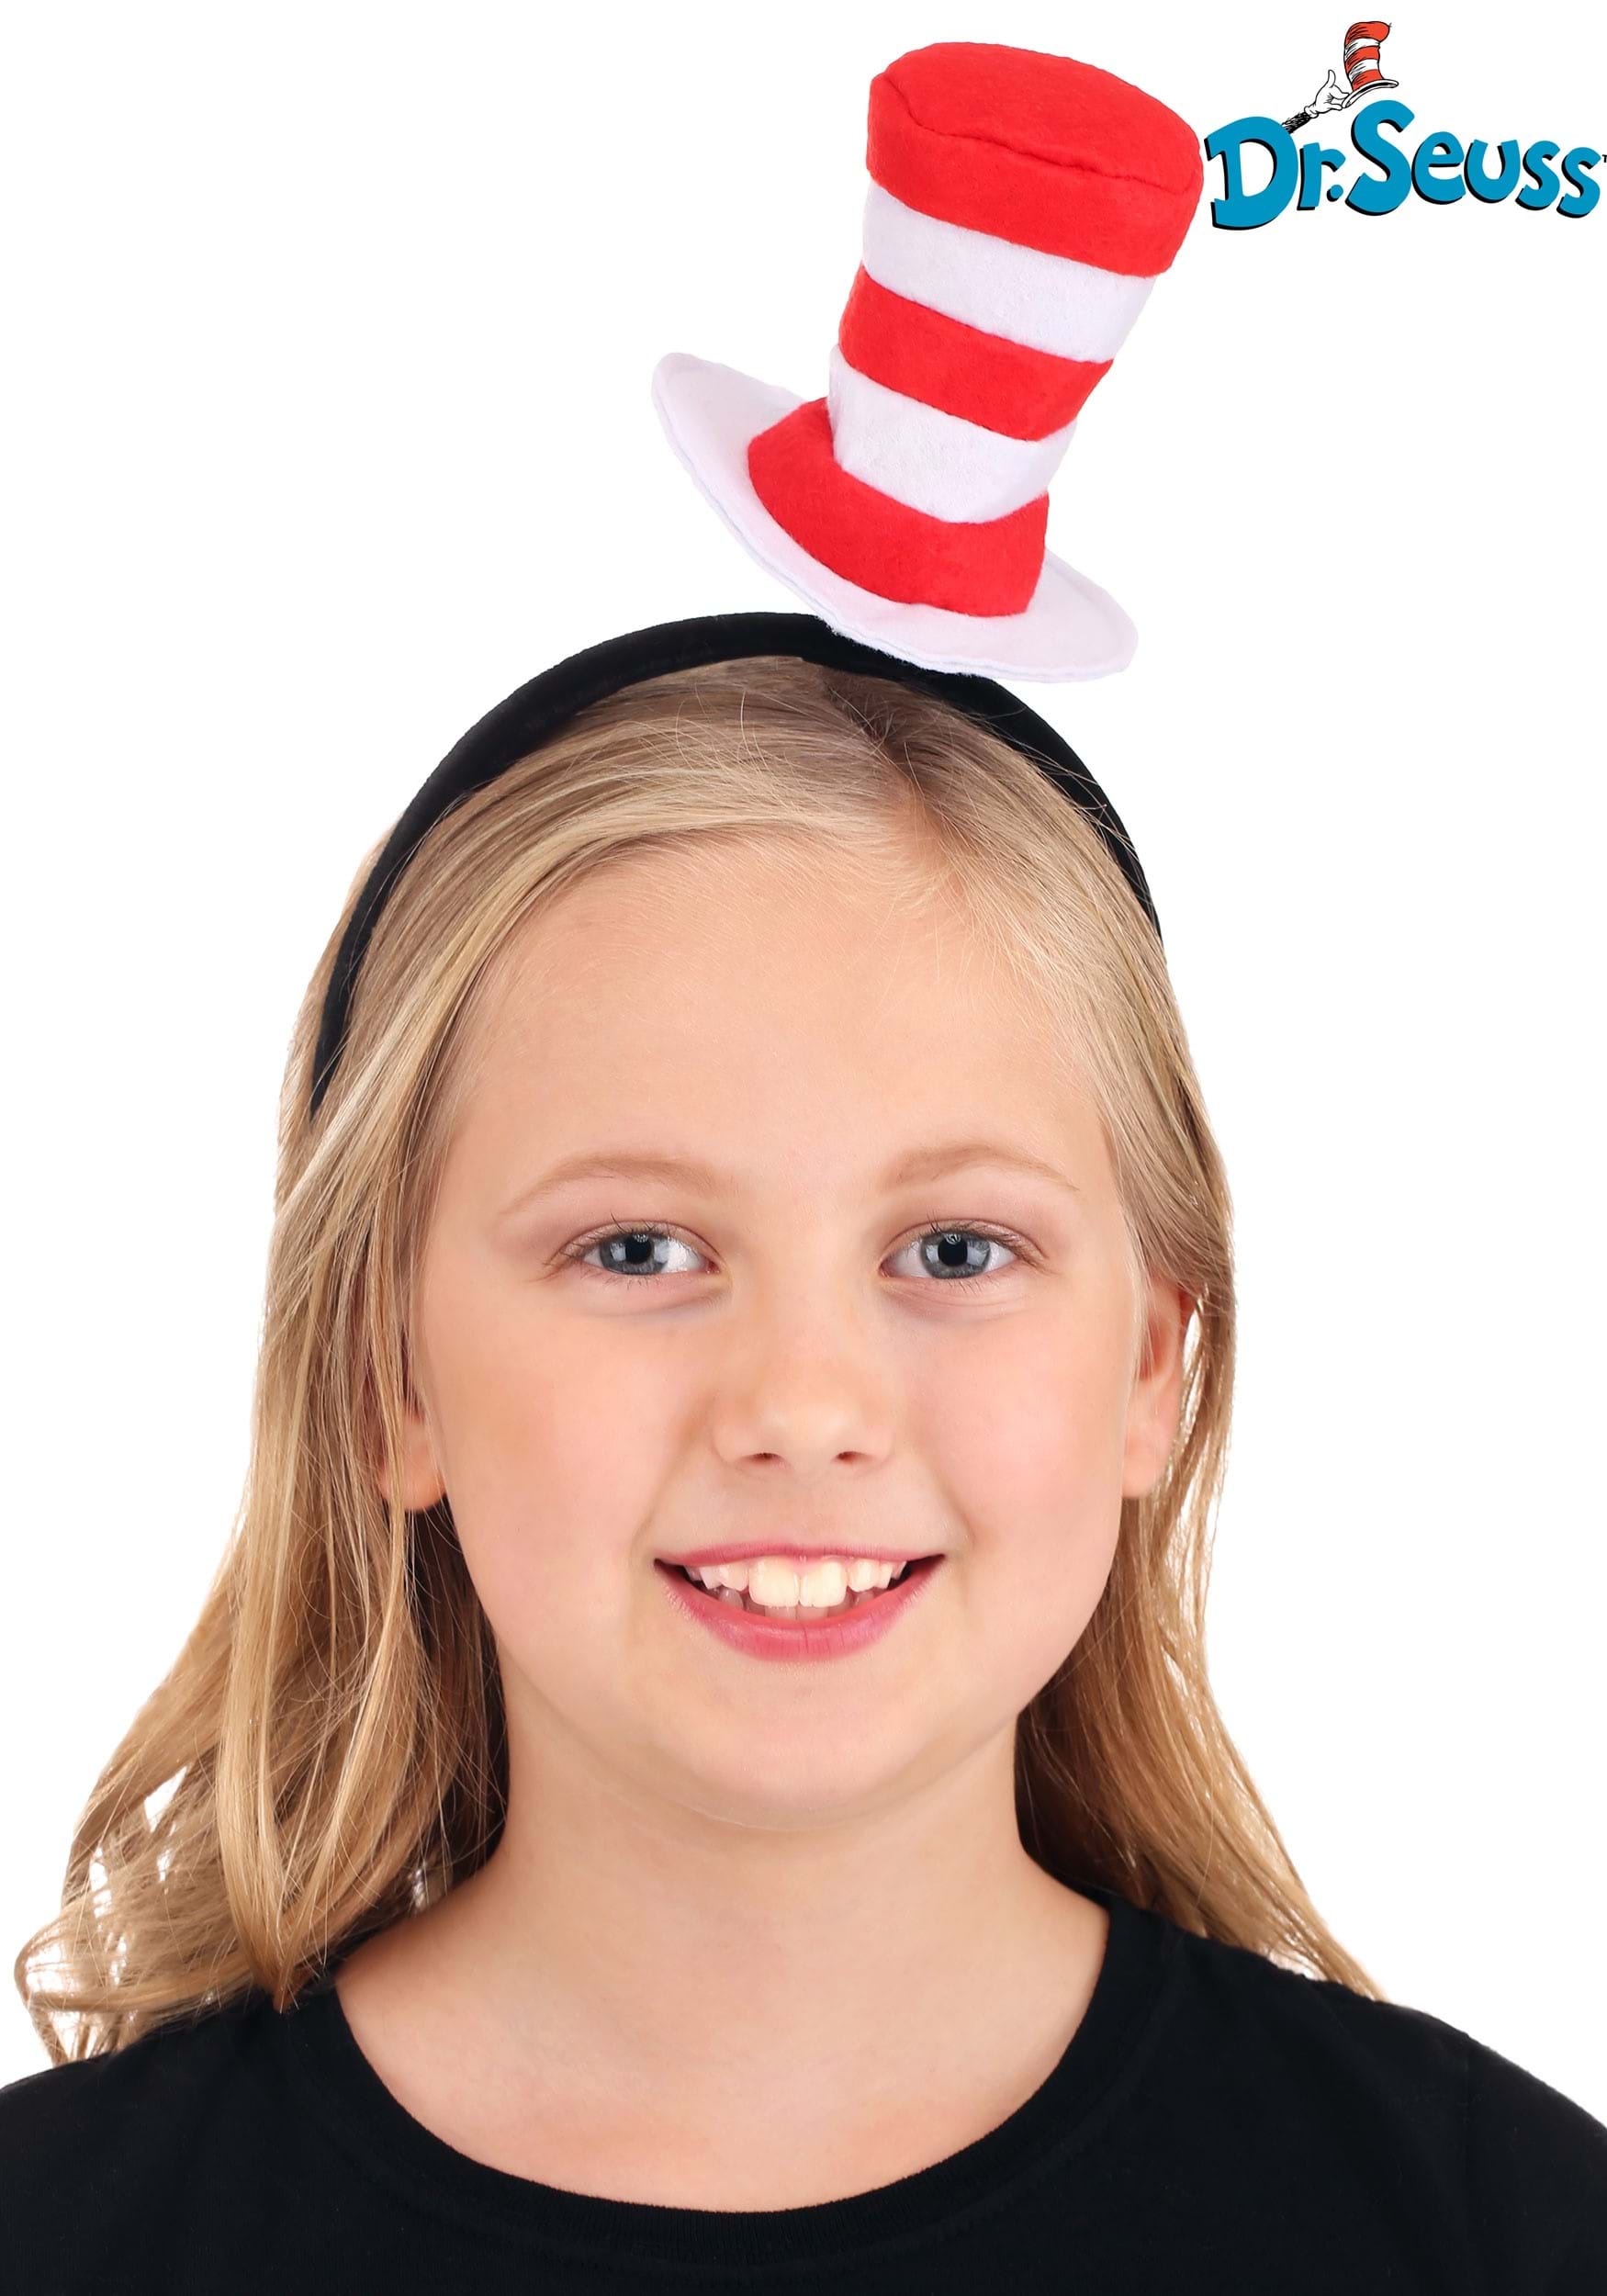 spring-headband-dr-seuss-the-cat-in-the-hat-costume